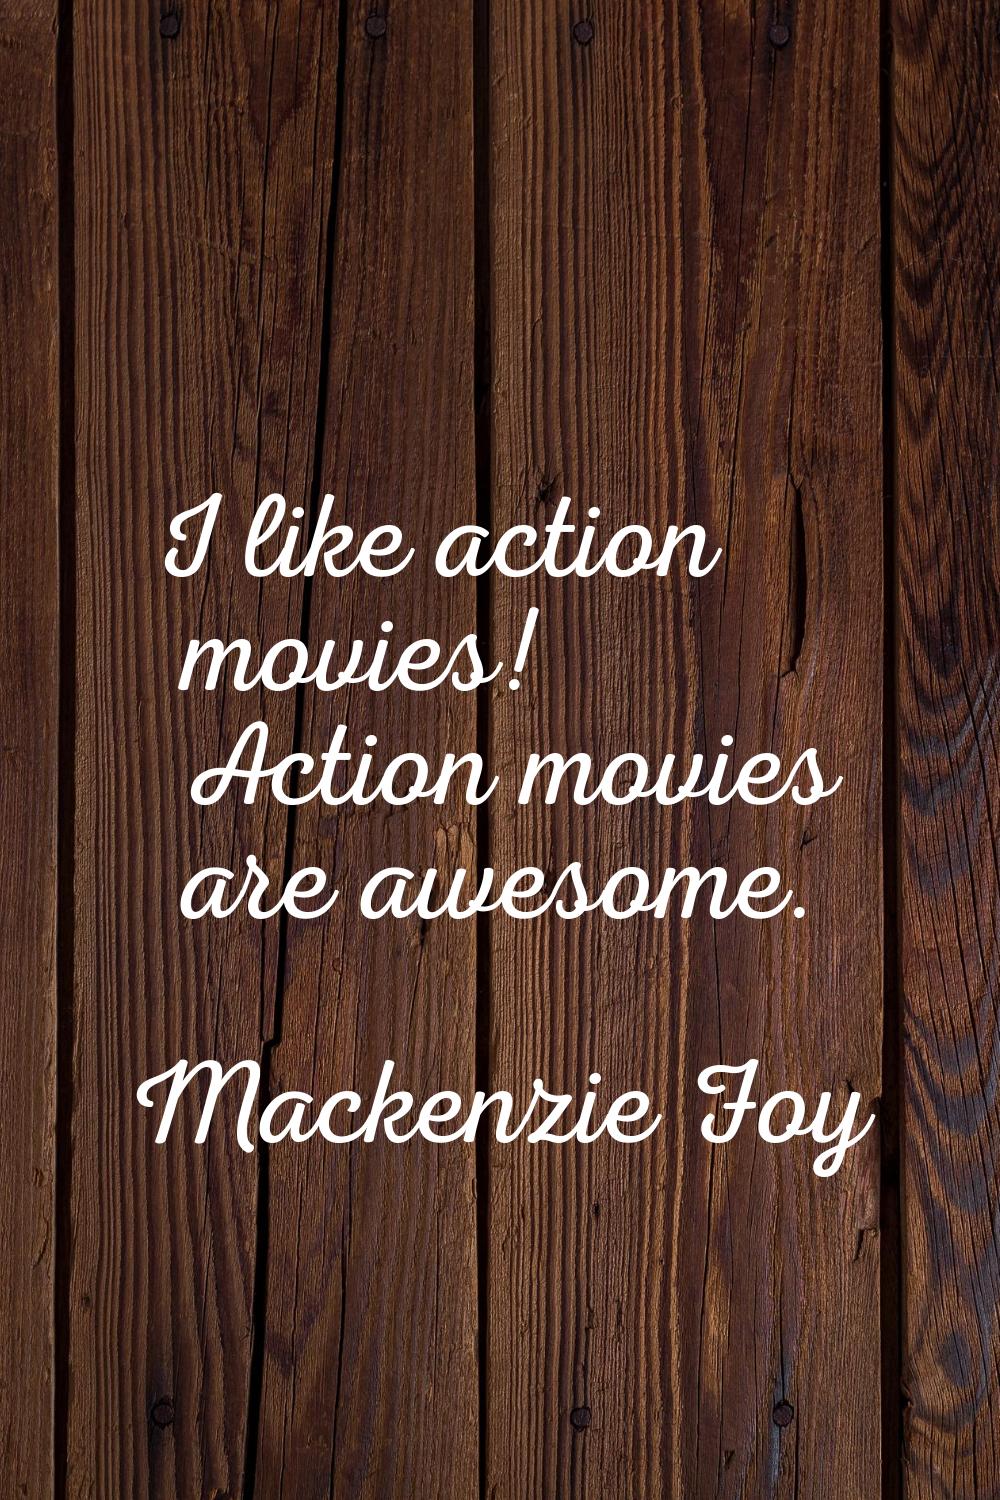 I like action movies! Action movies are awesome.